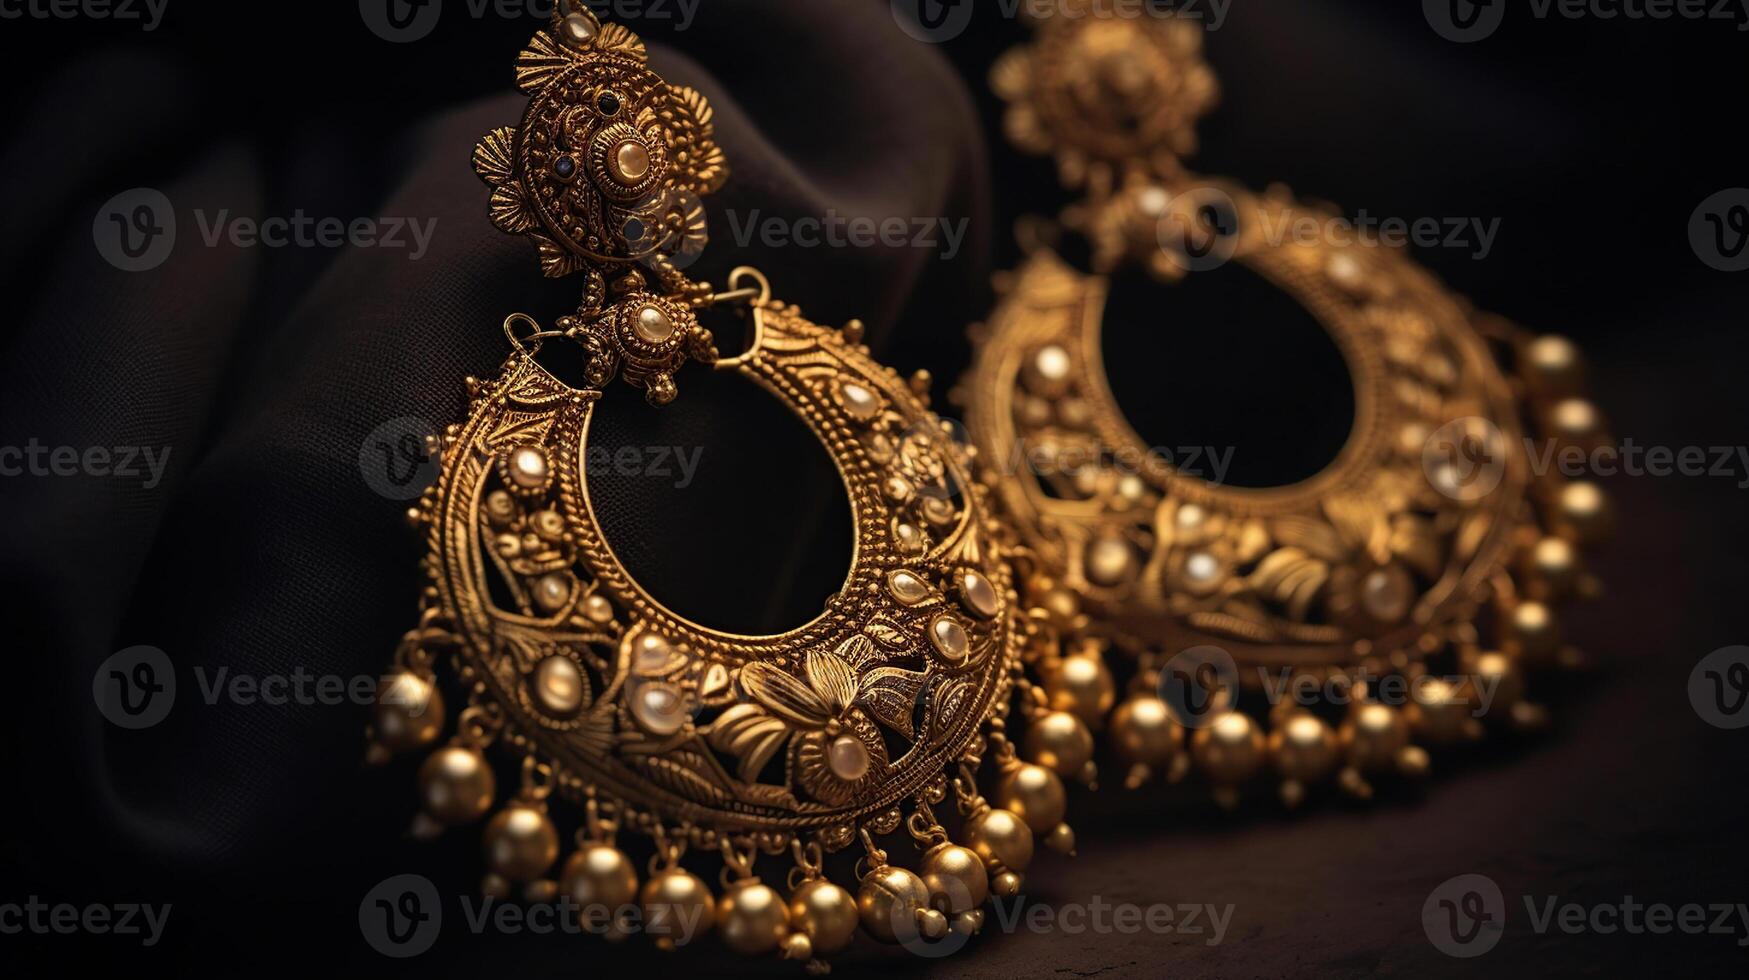 Beautiful Indian Antique Golden pair of earrings, Luxury female jewelry, Indian traditional jewellery,Indian jewelry Bridal earrings wedding jewellery heavy party earrings, photo